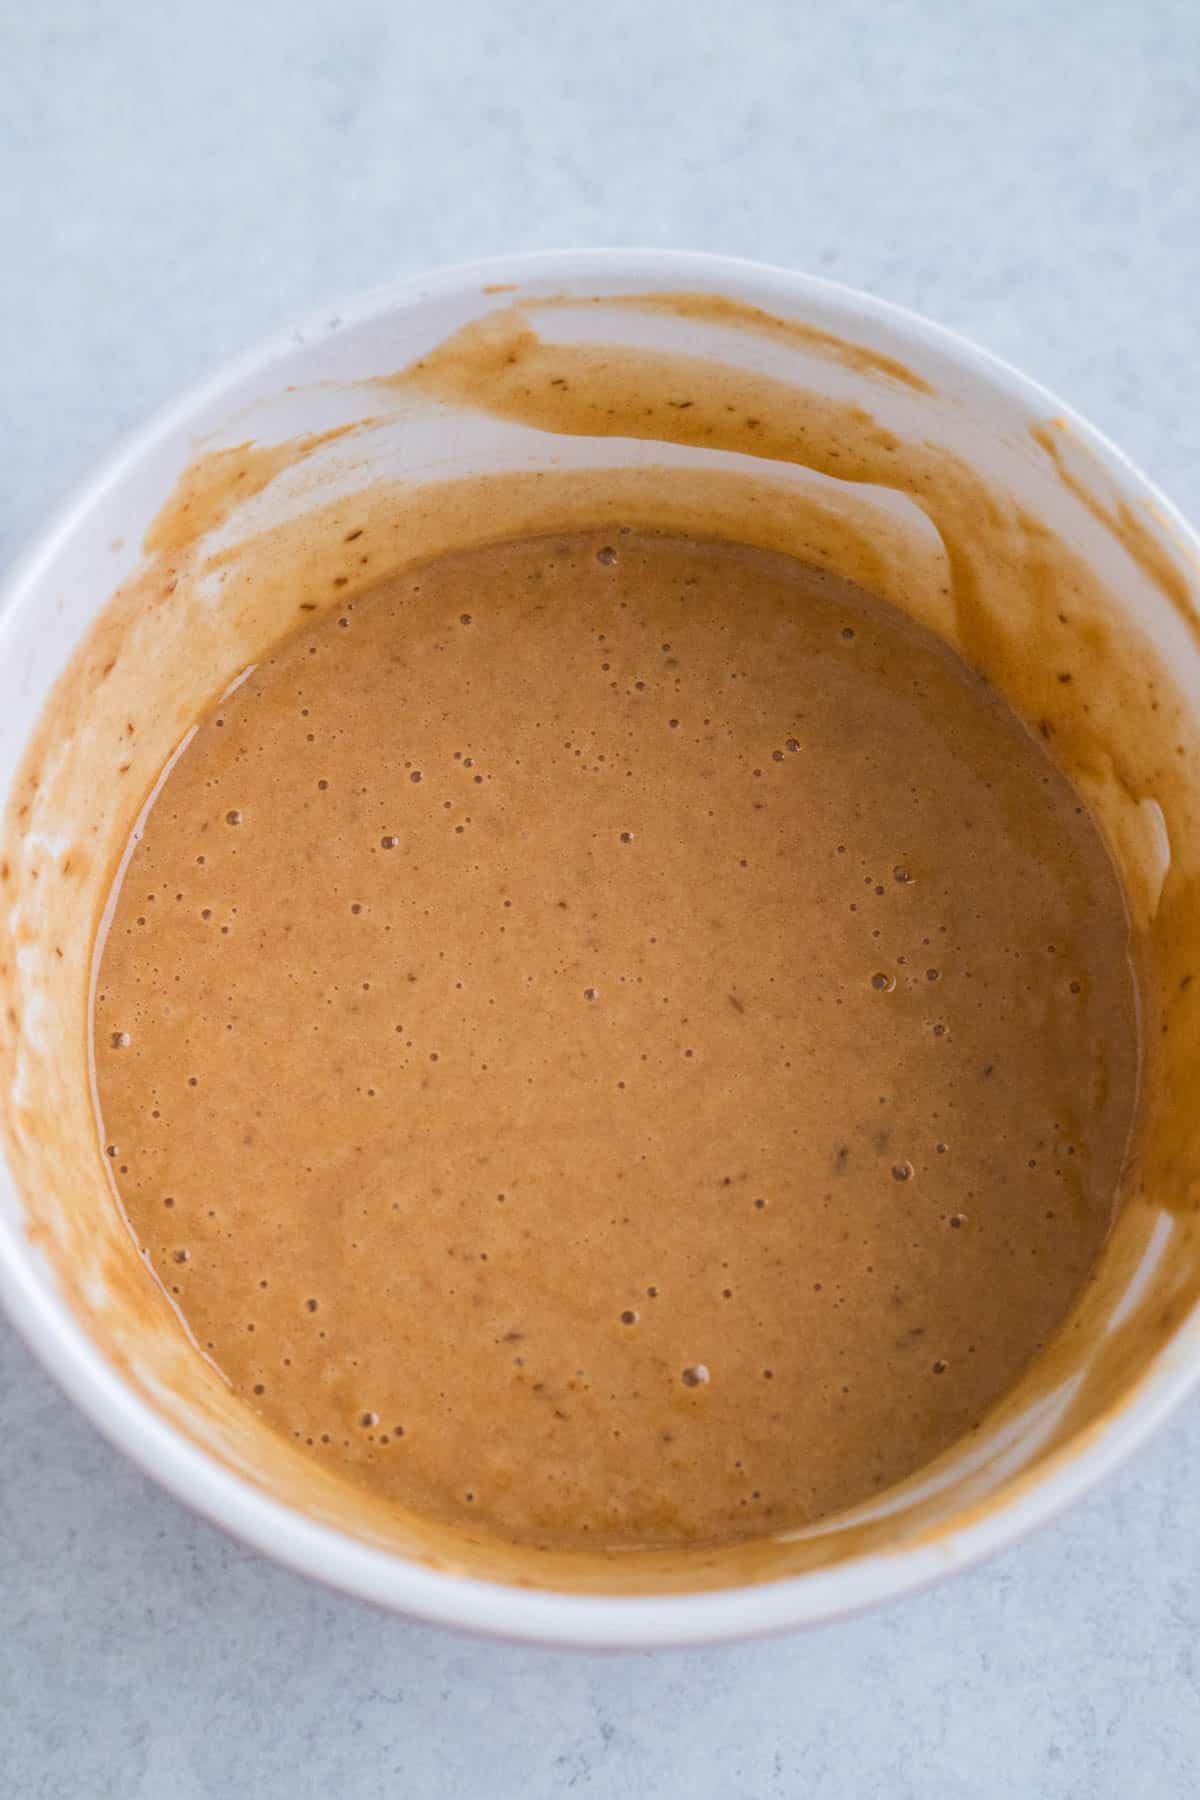 Sticky toffee pudding batter.